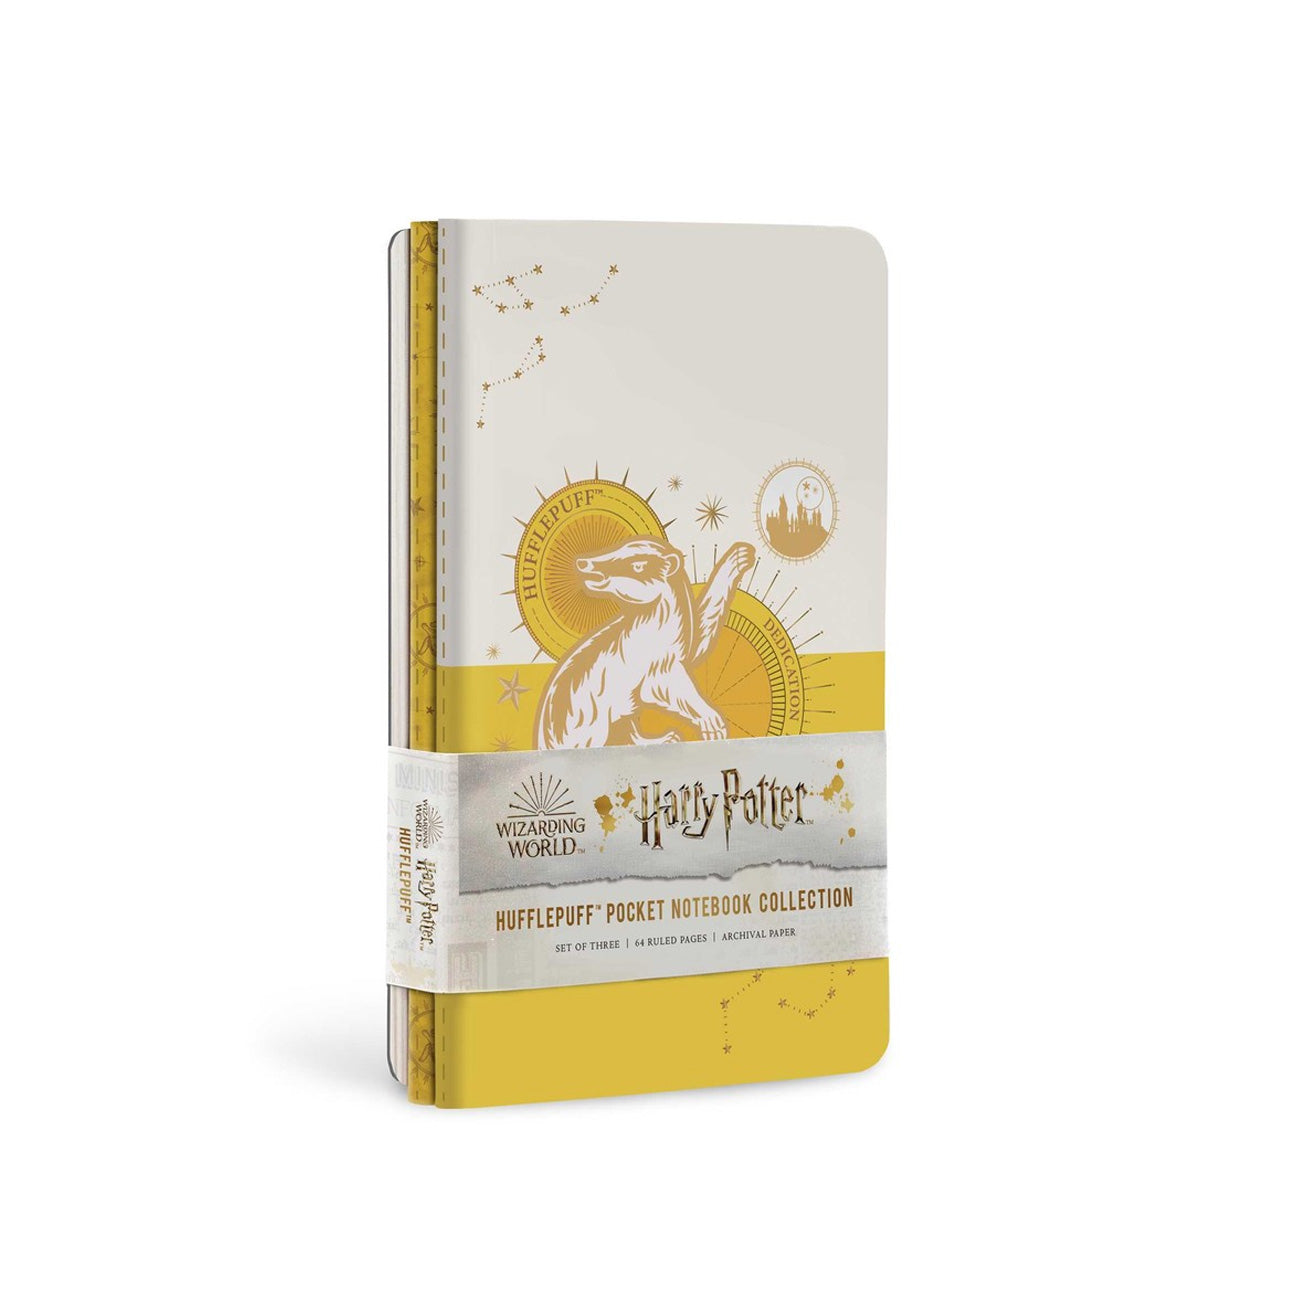 Hufflepuff Constellation Pocket Notebook Collection, Set of 3